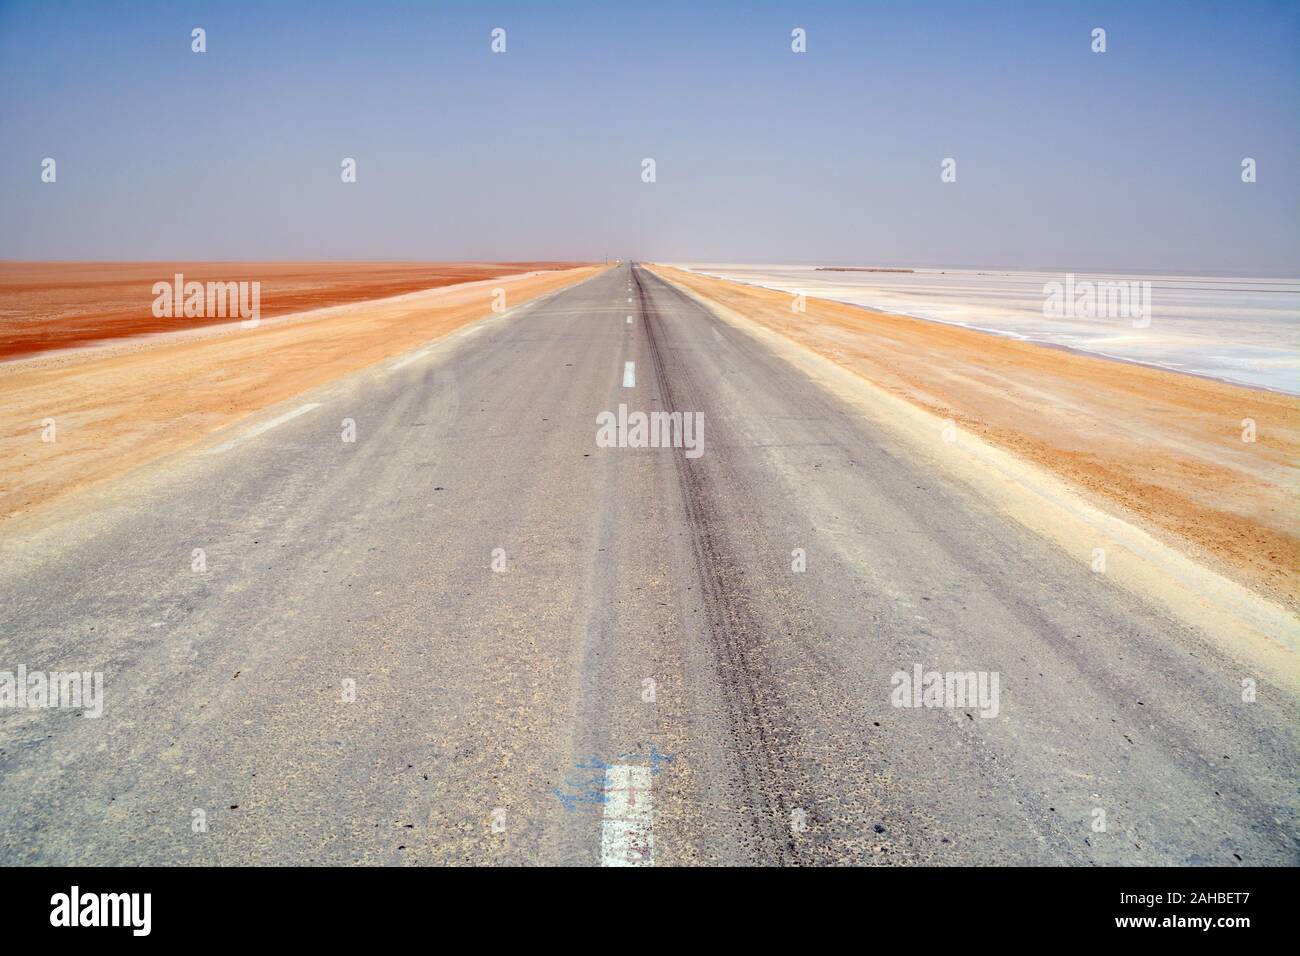 A road running through the colourful Chott el Djerid salt lake near the town of Tozeur in the Sahara Desert of southern Tunisia, North Africa. Stock Photo